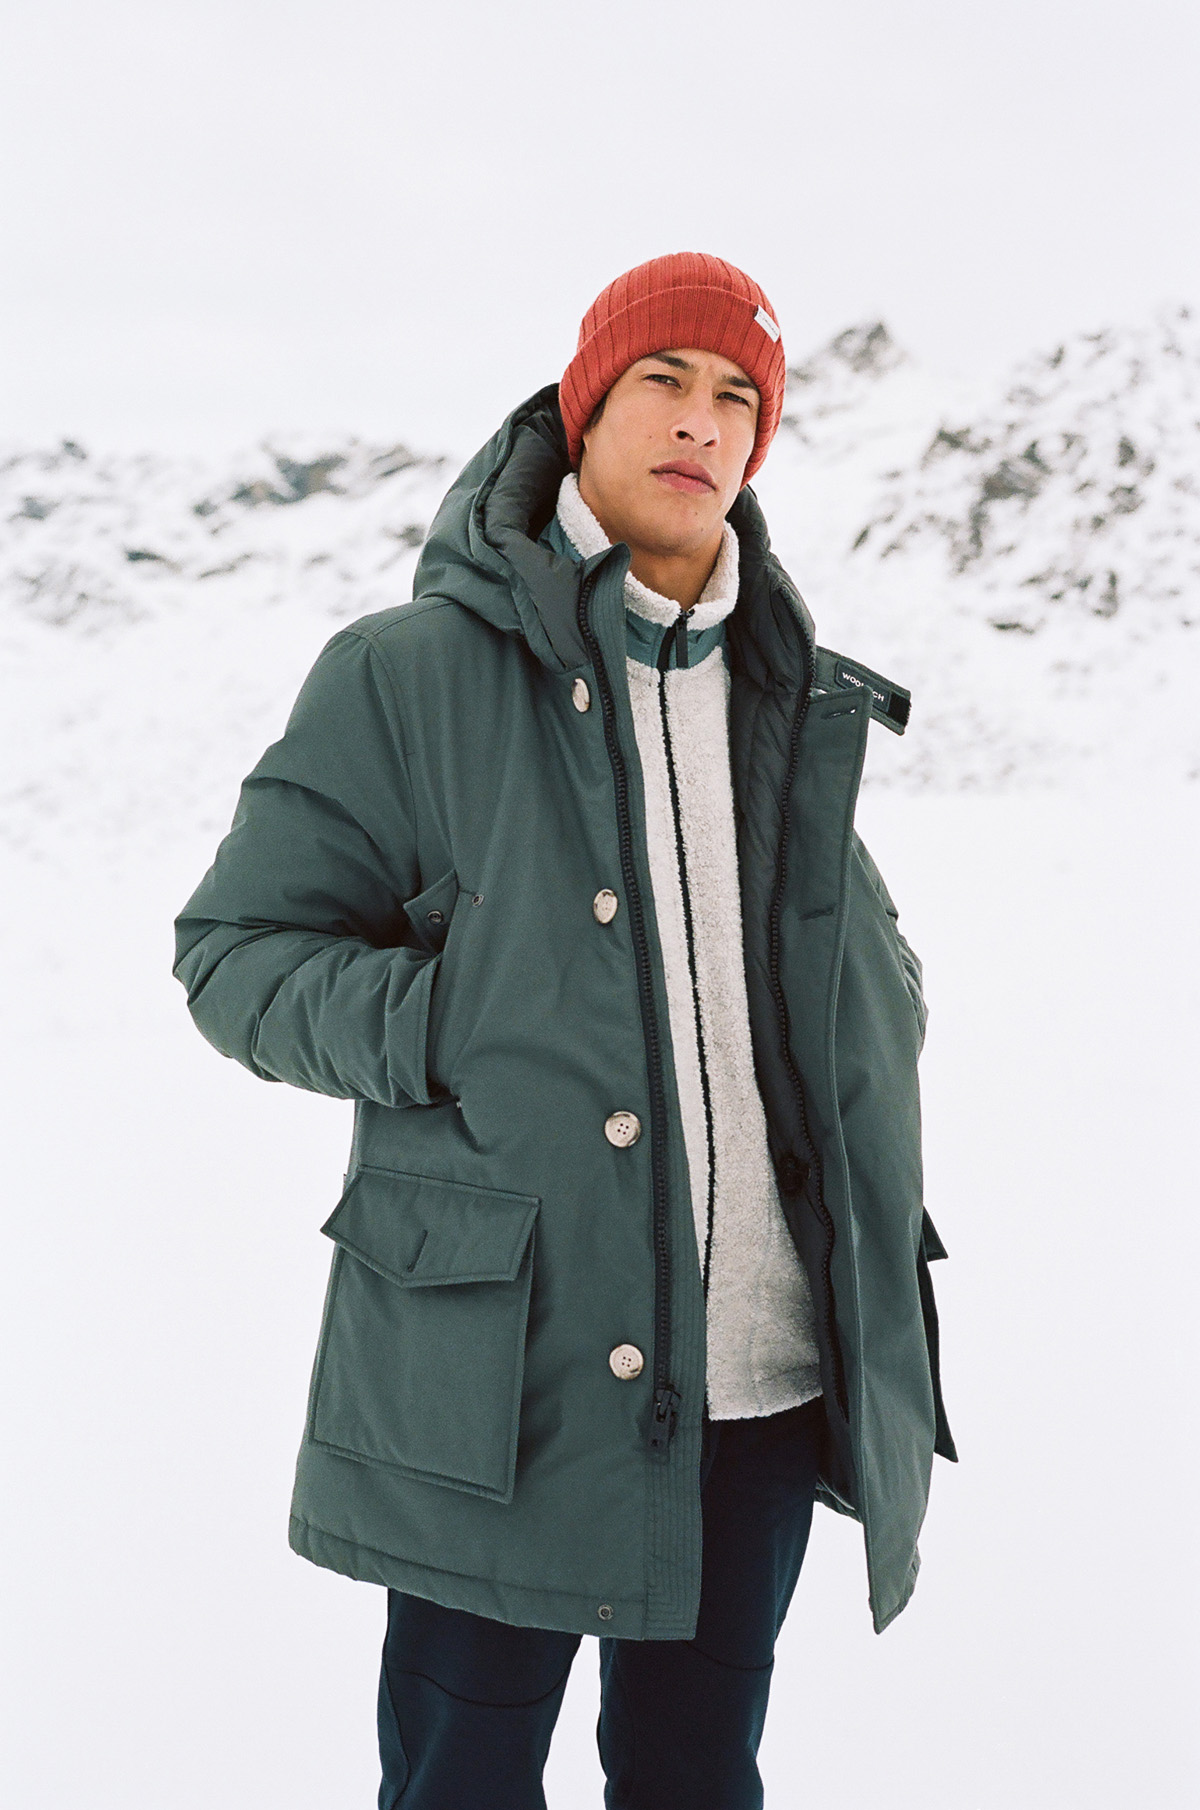 Adventure Time In The Alaskan Tundra With Woolrich